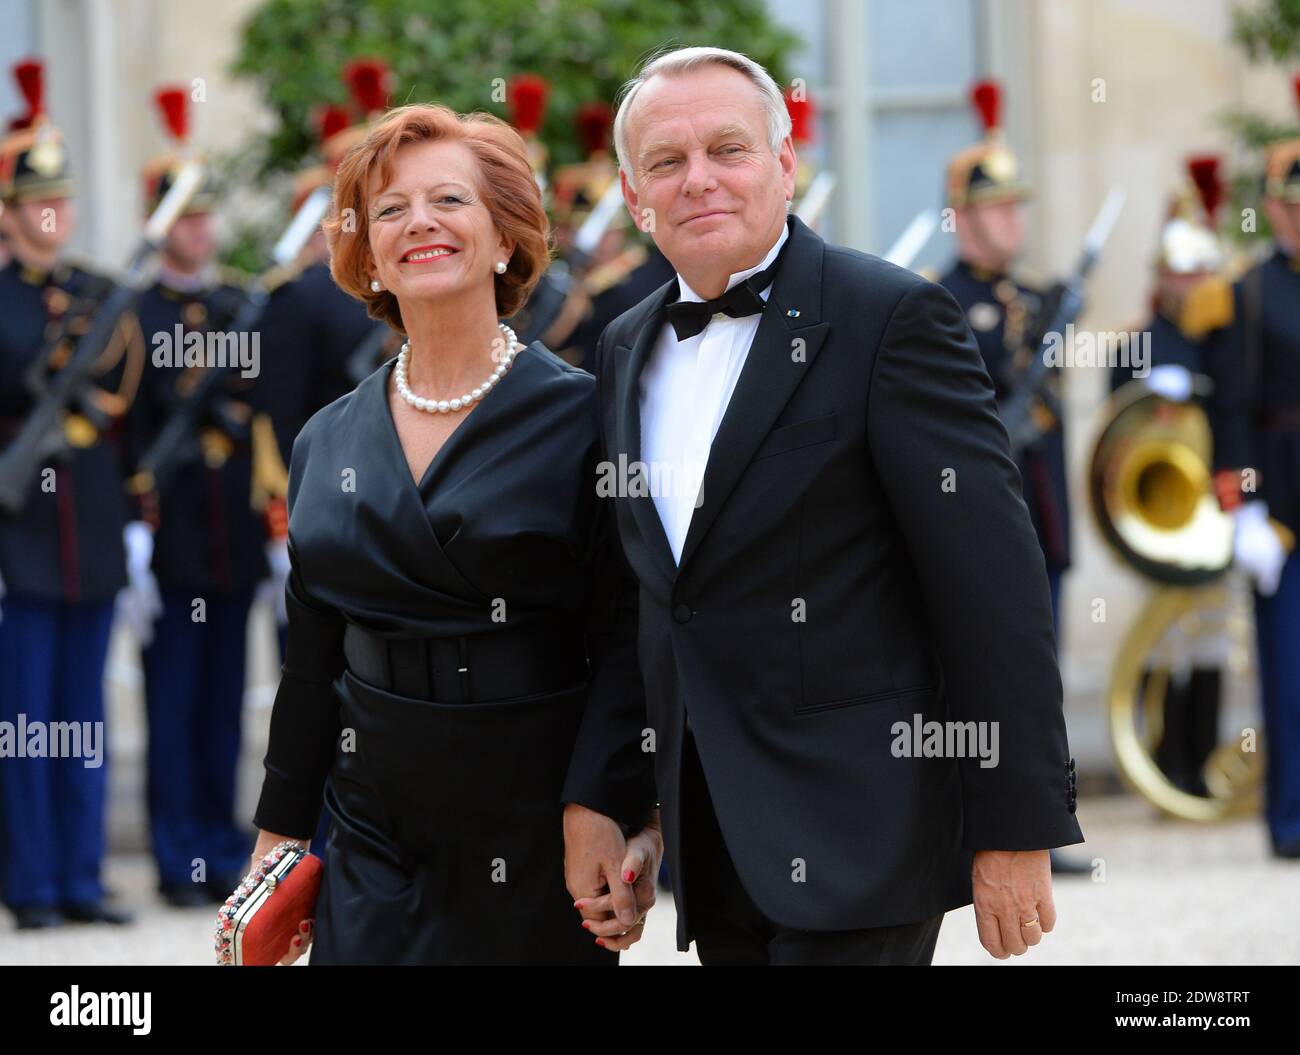 Former Prime Minister Jean-Marc Ayrault and Brigitte Ayrault attend the State Banquet given in honour of HM The Queen Elizabeth II by French President Francois Hollande at the Elysee Palace, as part of the official ceremonies of the 70th Anniversary of the D Day, on June 6, 2014, in Paris, France. Photo by Christian Liewig/ABACAPRESS.COM Stock Photo